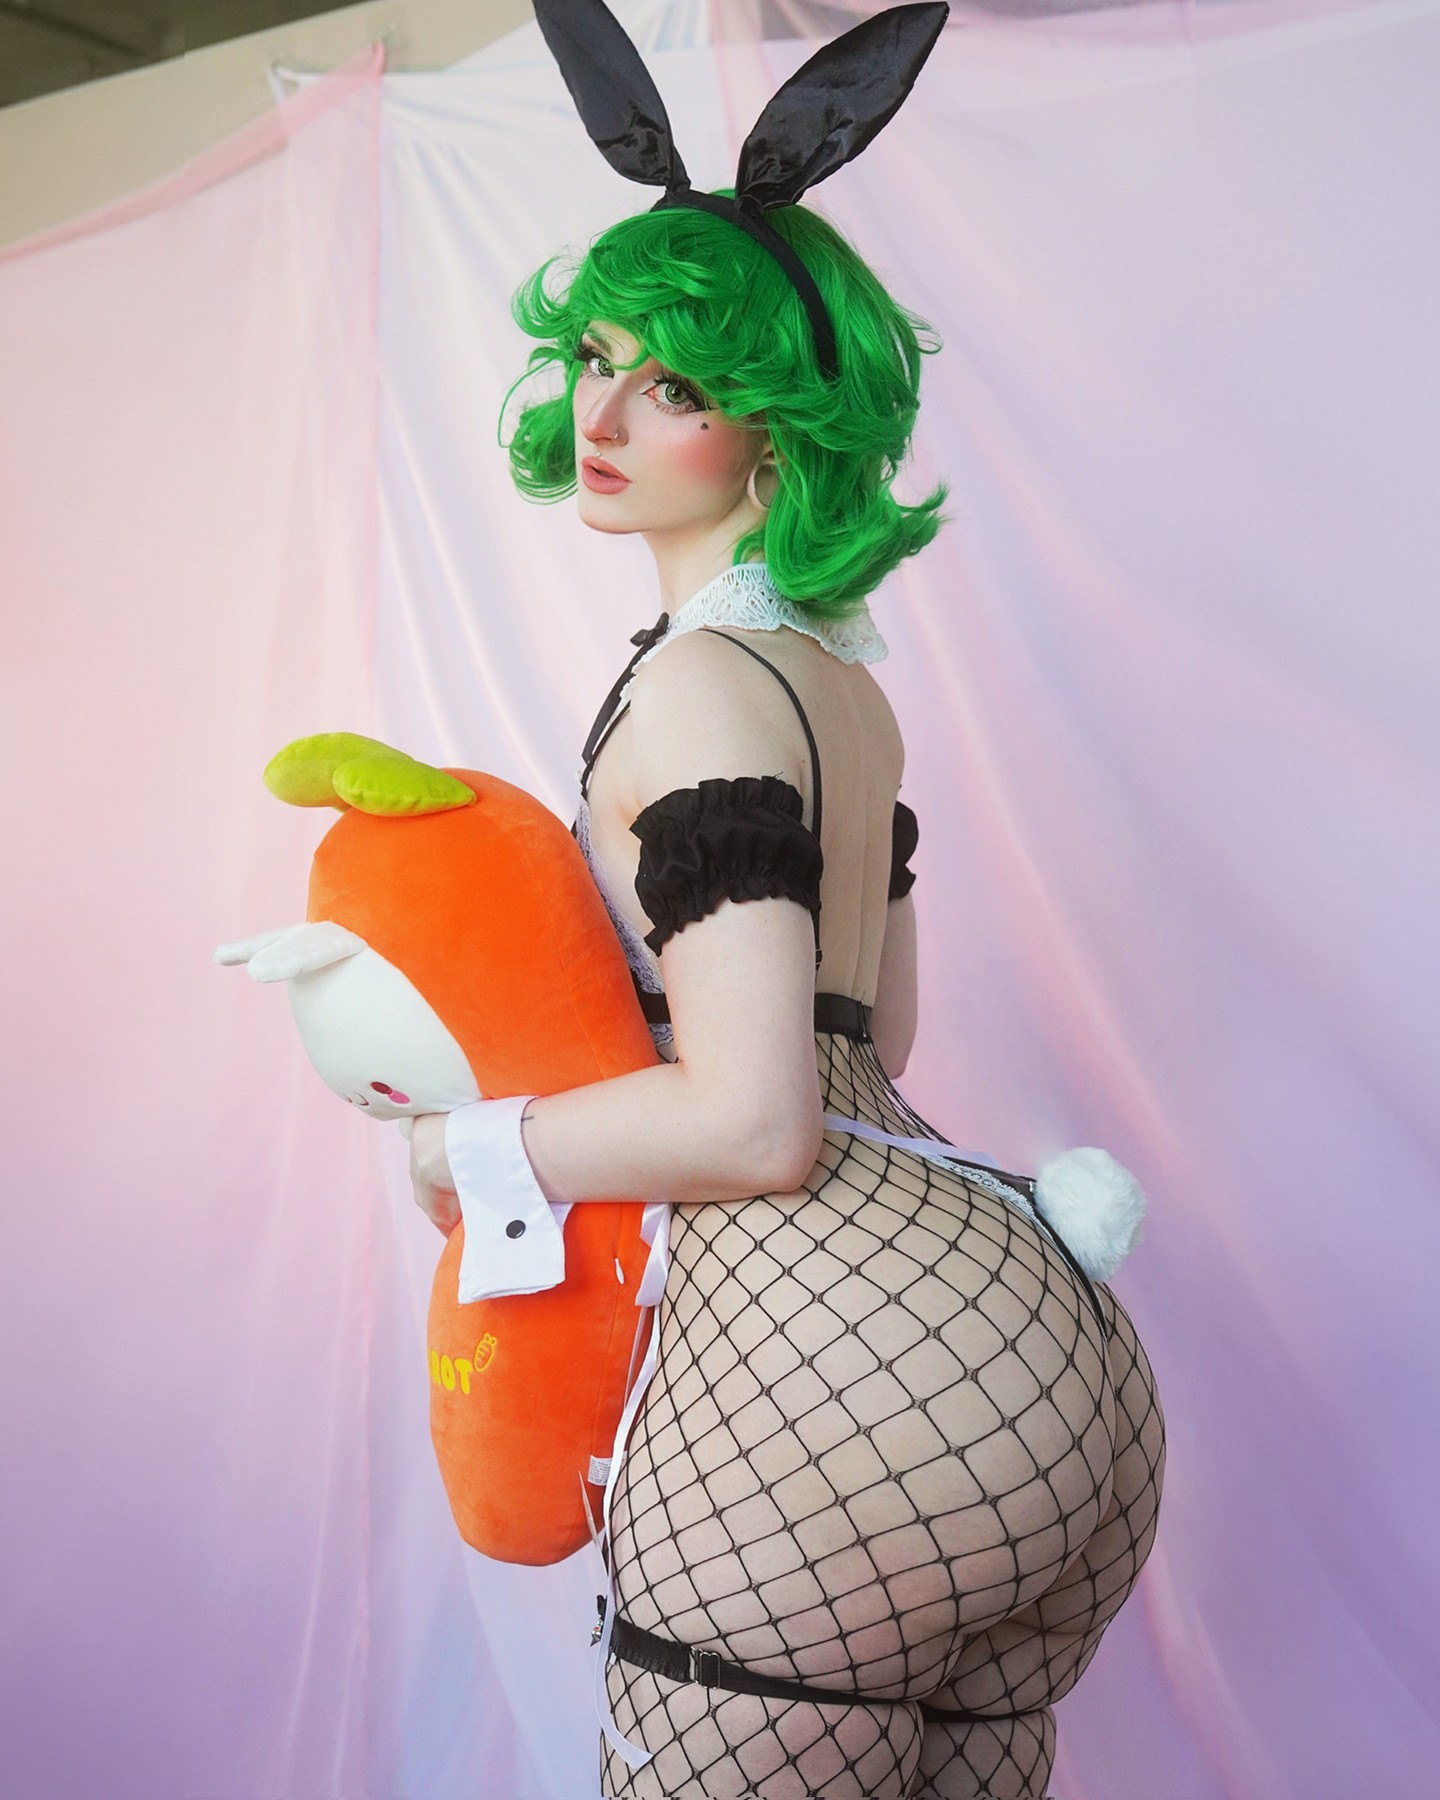 happy egg day ☺️🥕
Have you selected your ovoid offerings to sacrifice to your bunny god? 🙊 

#tatsumaki #bunnygirl #tatsumakicosplay #cosplay